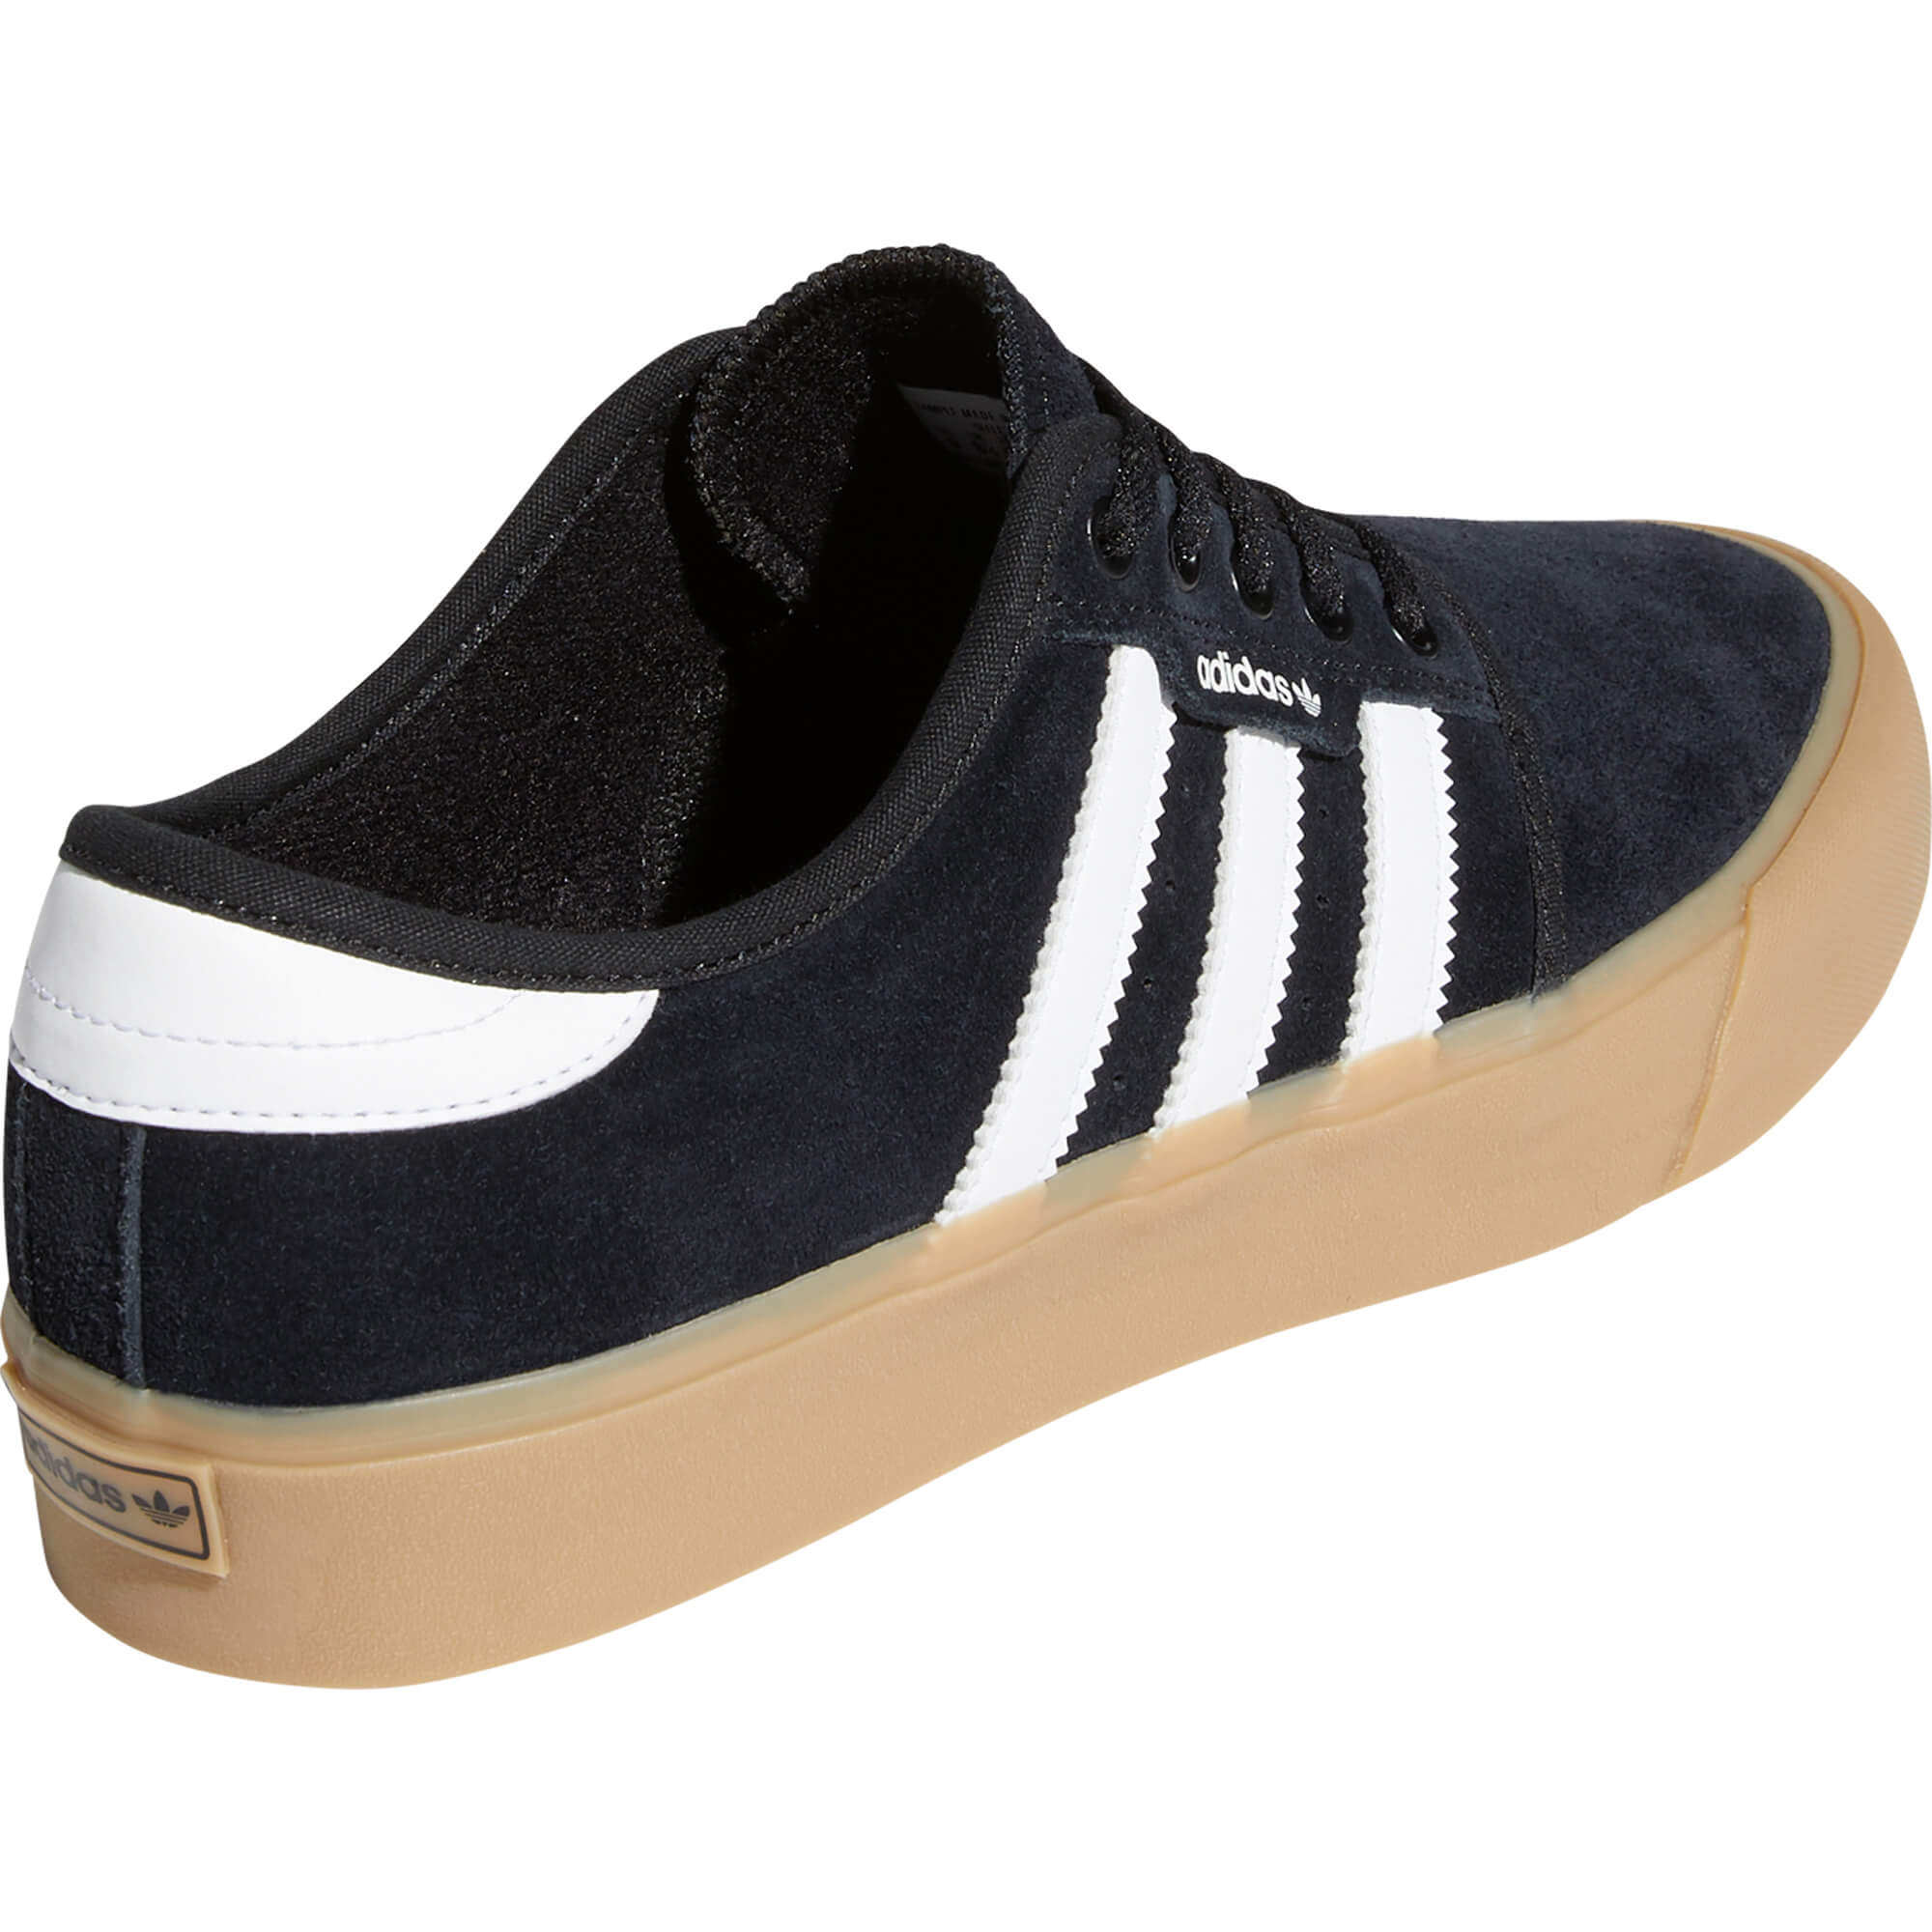 Adidas Seeley XT Men's Trainers Skate Shoes